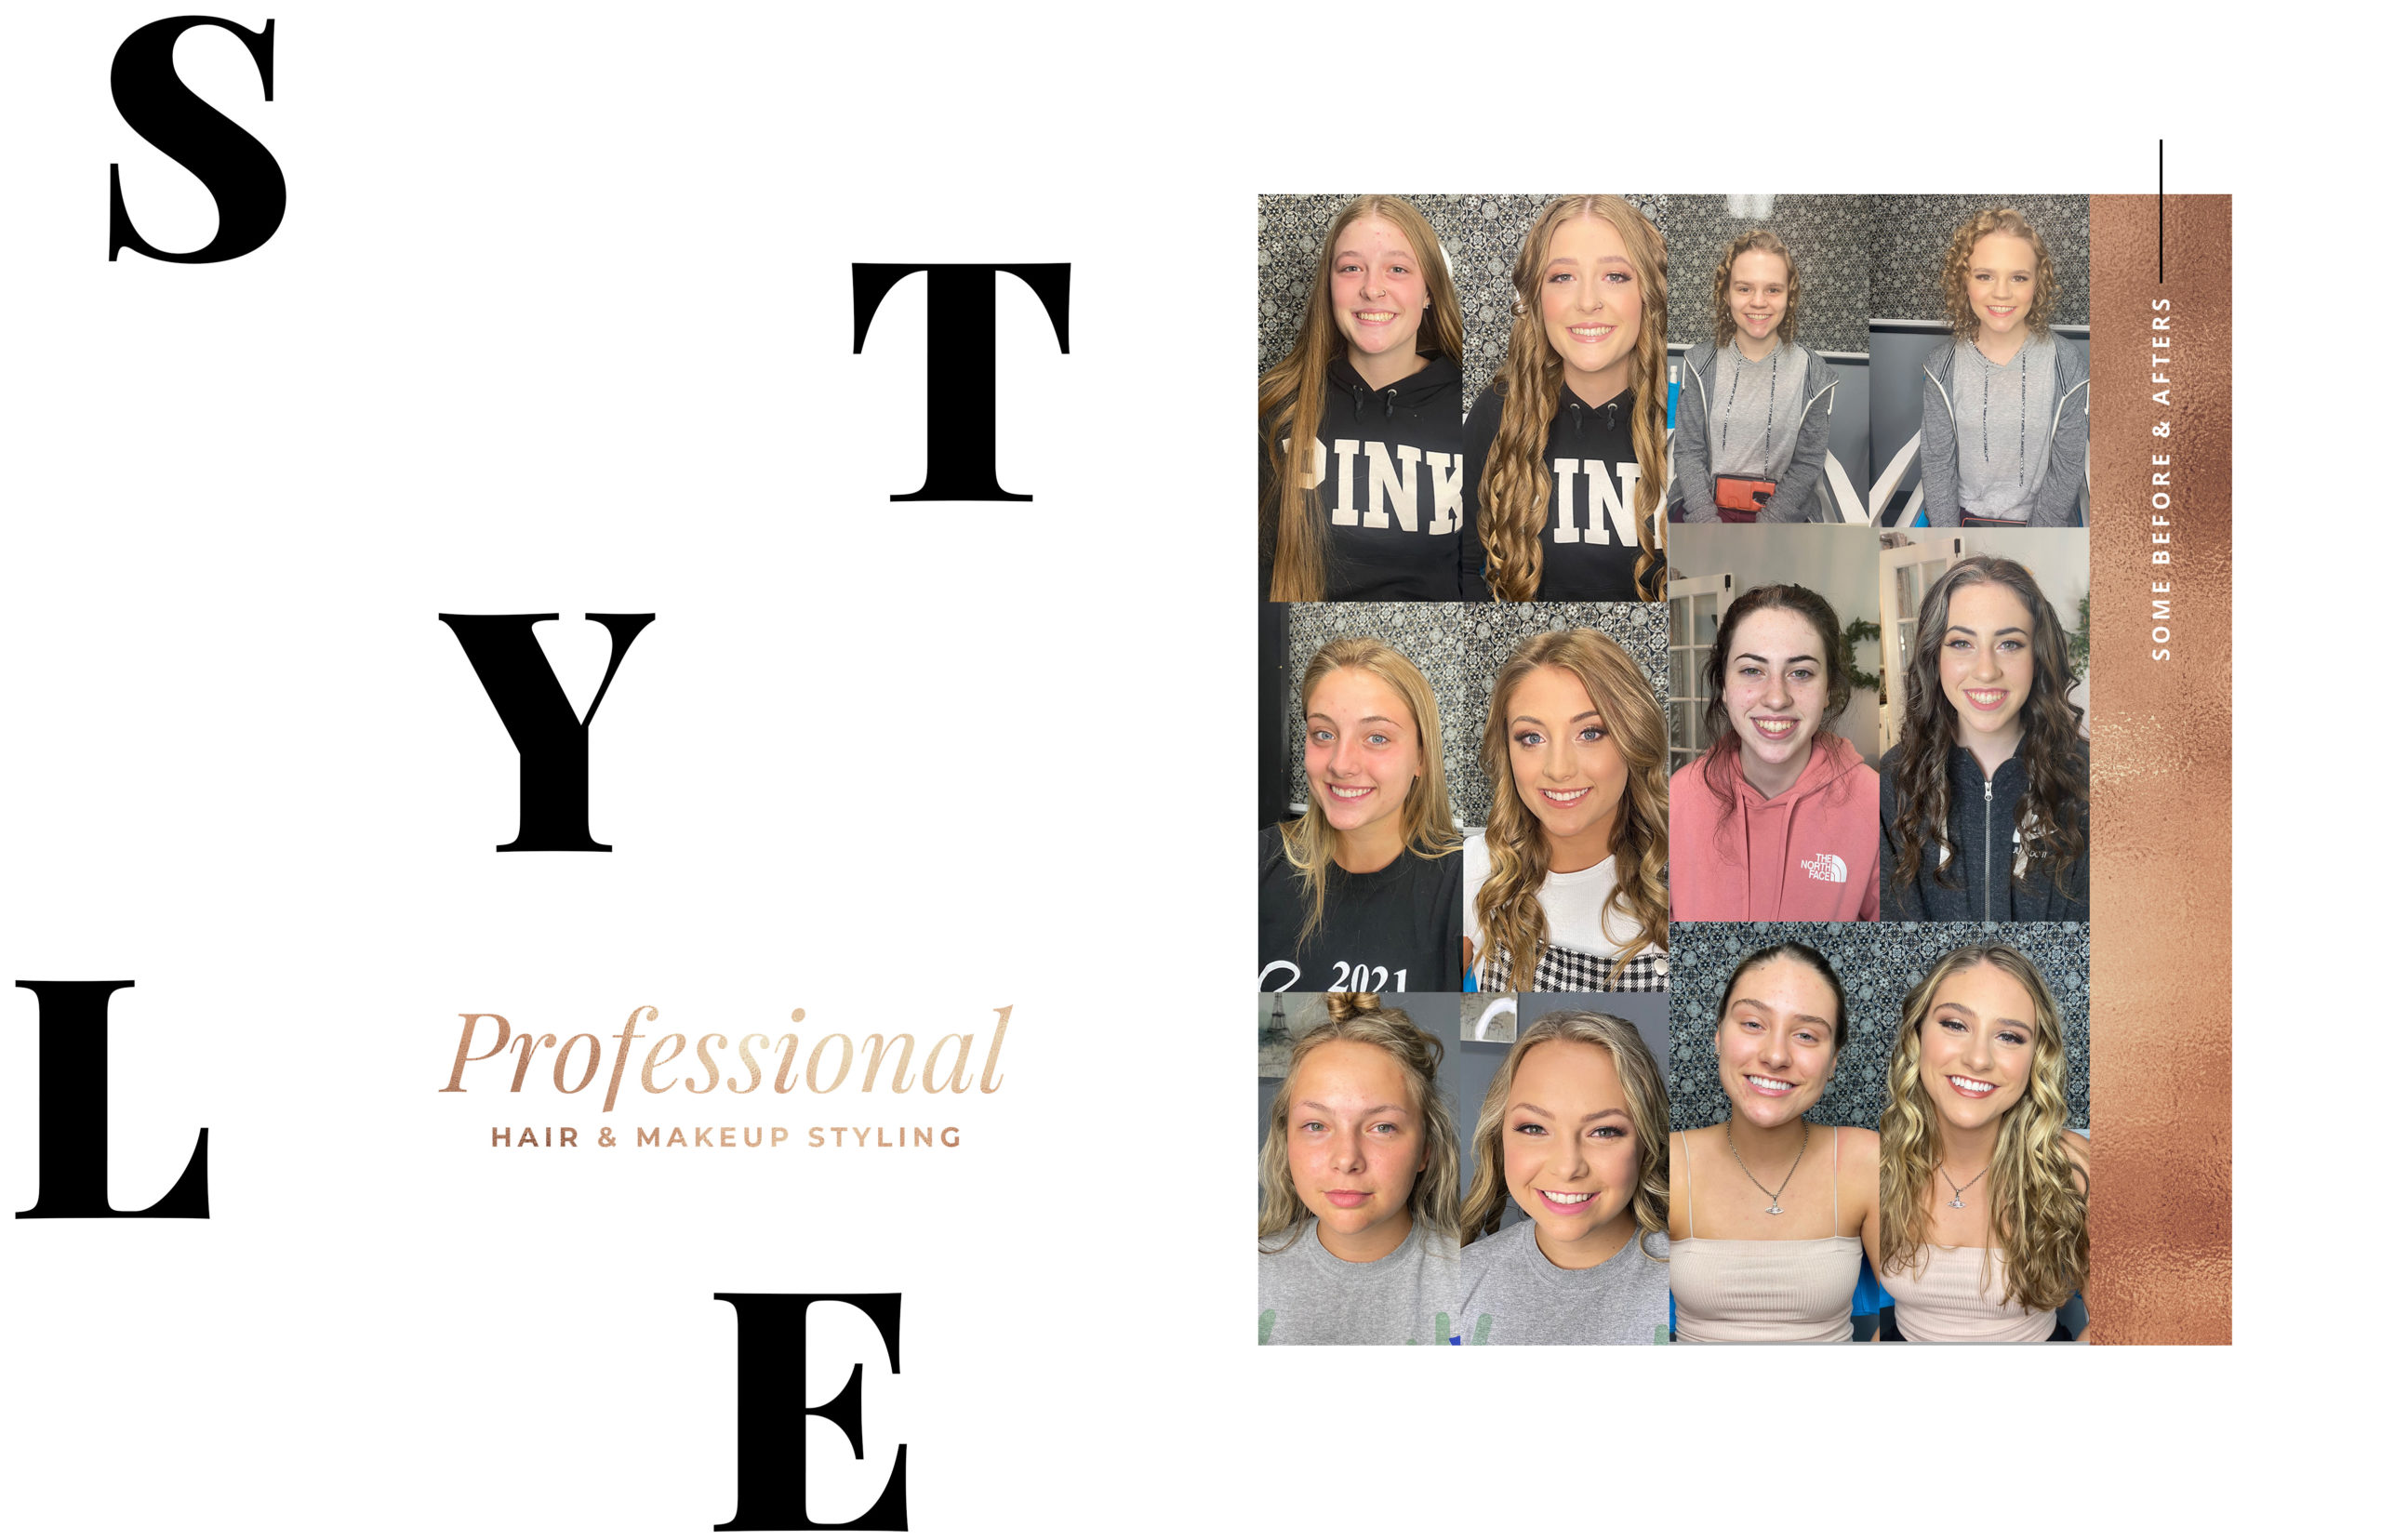 Before and After Photos of Senior Girls with Professional Hair and Makeup | Pro HMUA for Senior Portraits, Tacoma Studio, Tacoma Indoor Senior Portraits | Photographed by the Best Tacoma Senior Portrait Photographer Amanda Howse